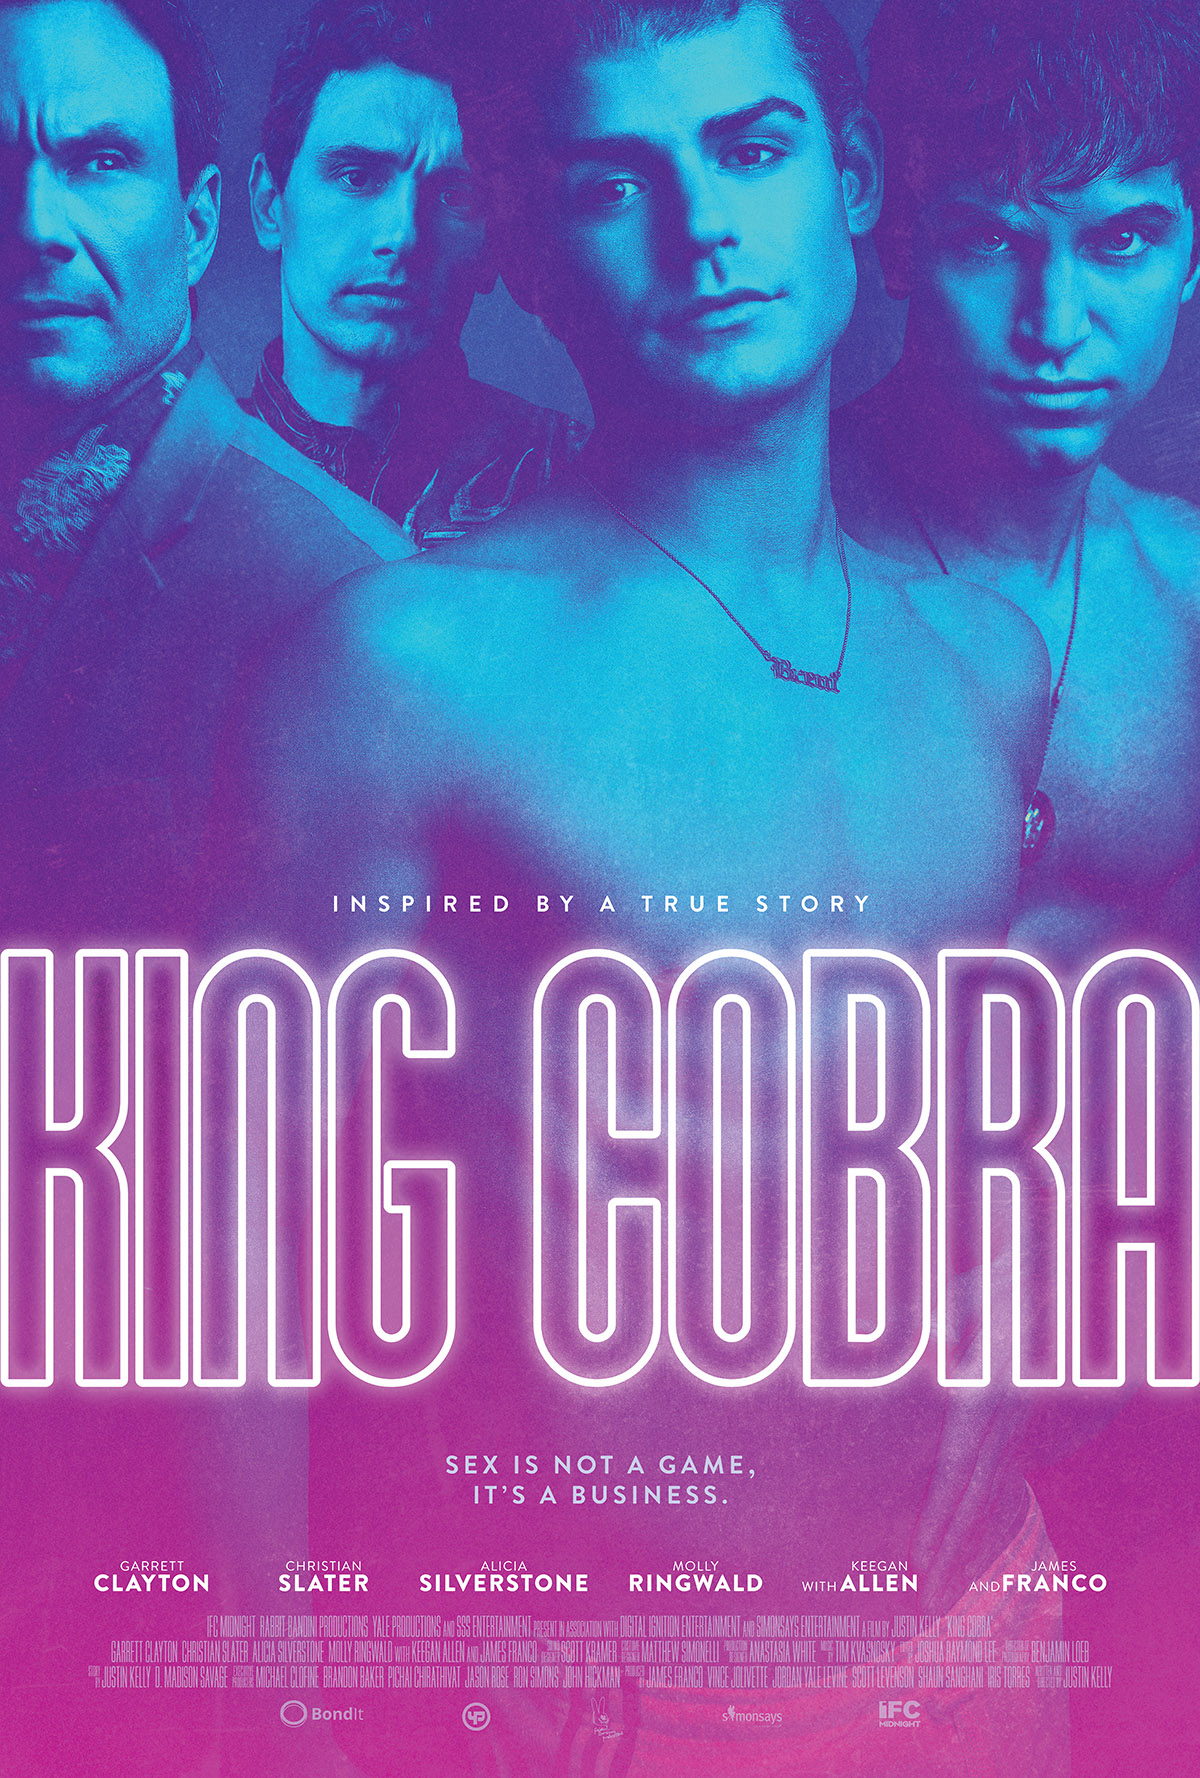 Black Cobra X Download - King Cobra | Horror, Aliens, zombies, vampires, creature features and more  from IFC Midnight, a leading distributor in genre entertainment. | IFC Films